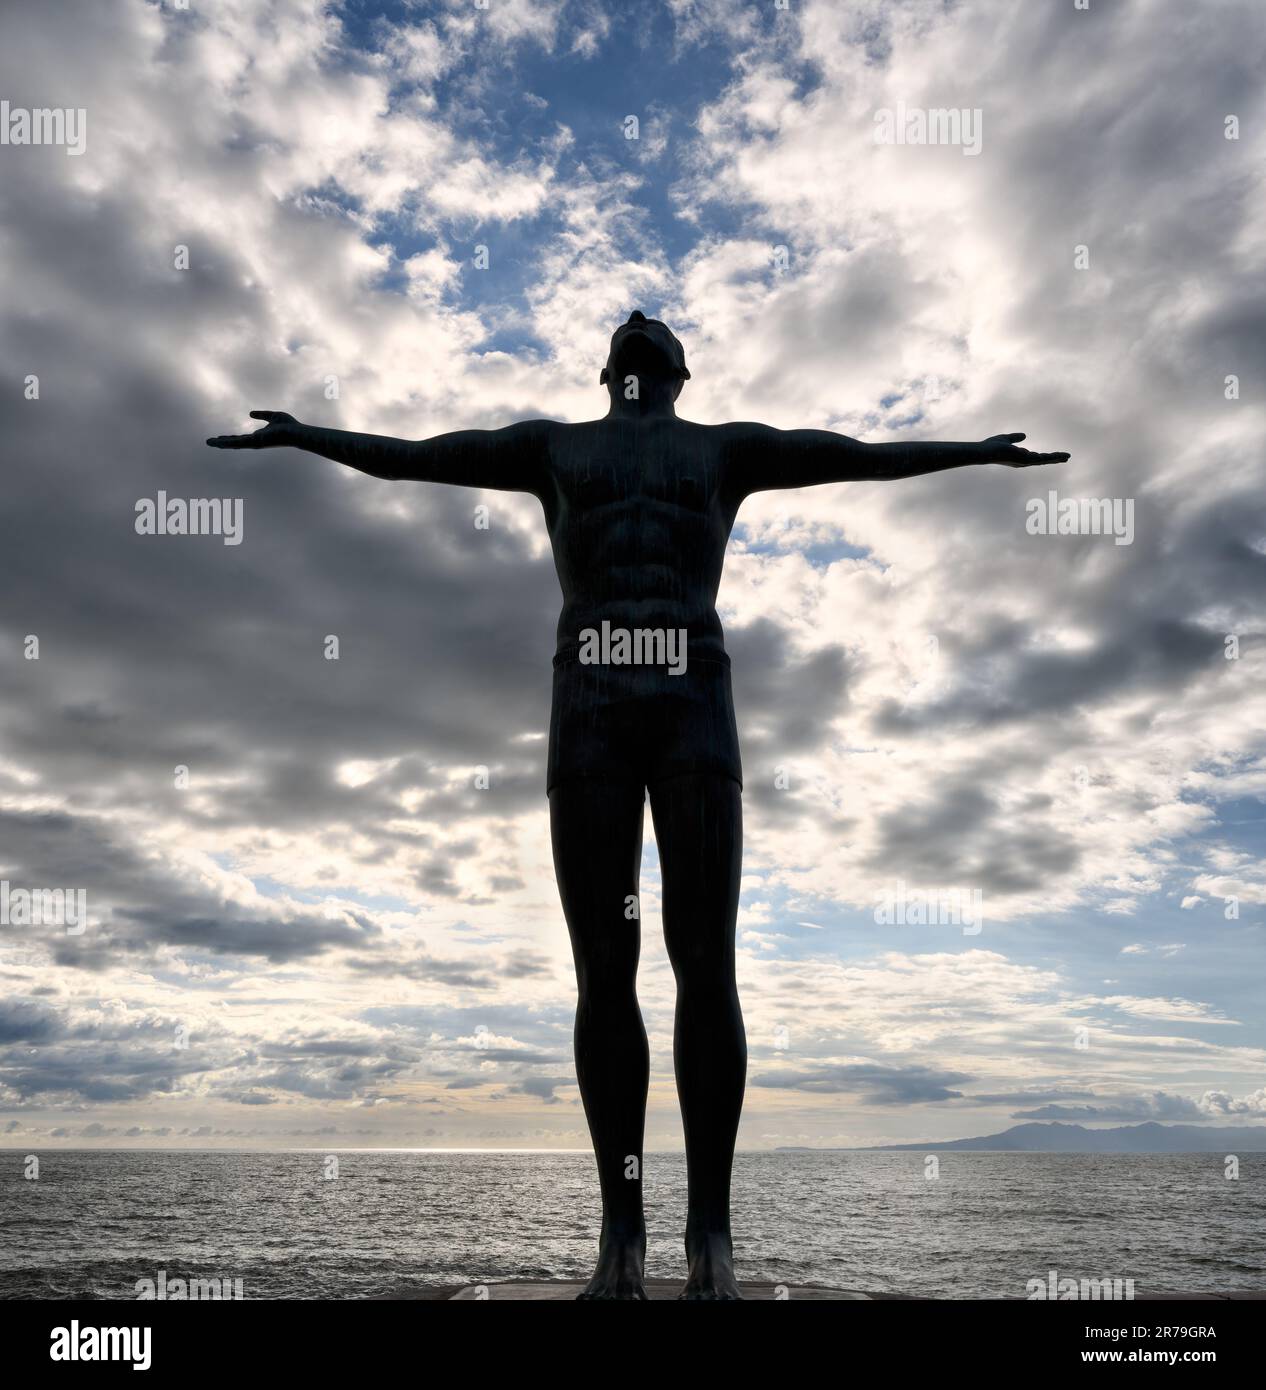 A Silhouette Of A Man With Outstretched Arms Looking Up To The Sky Vertical Stock Photo